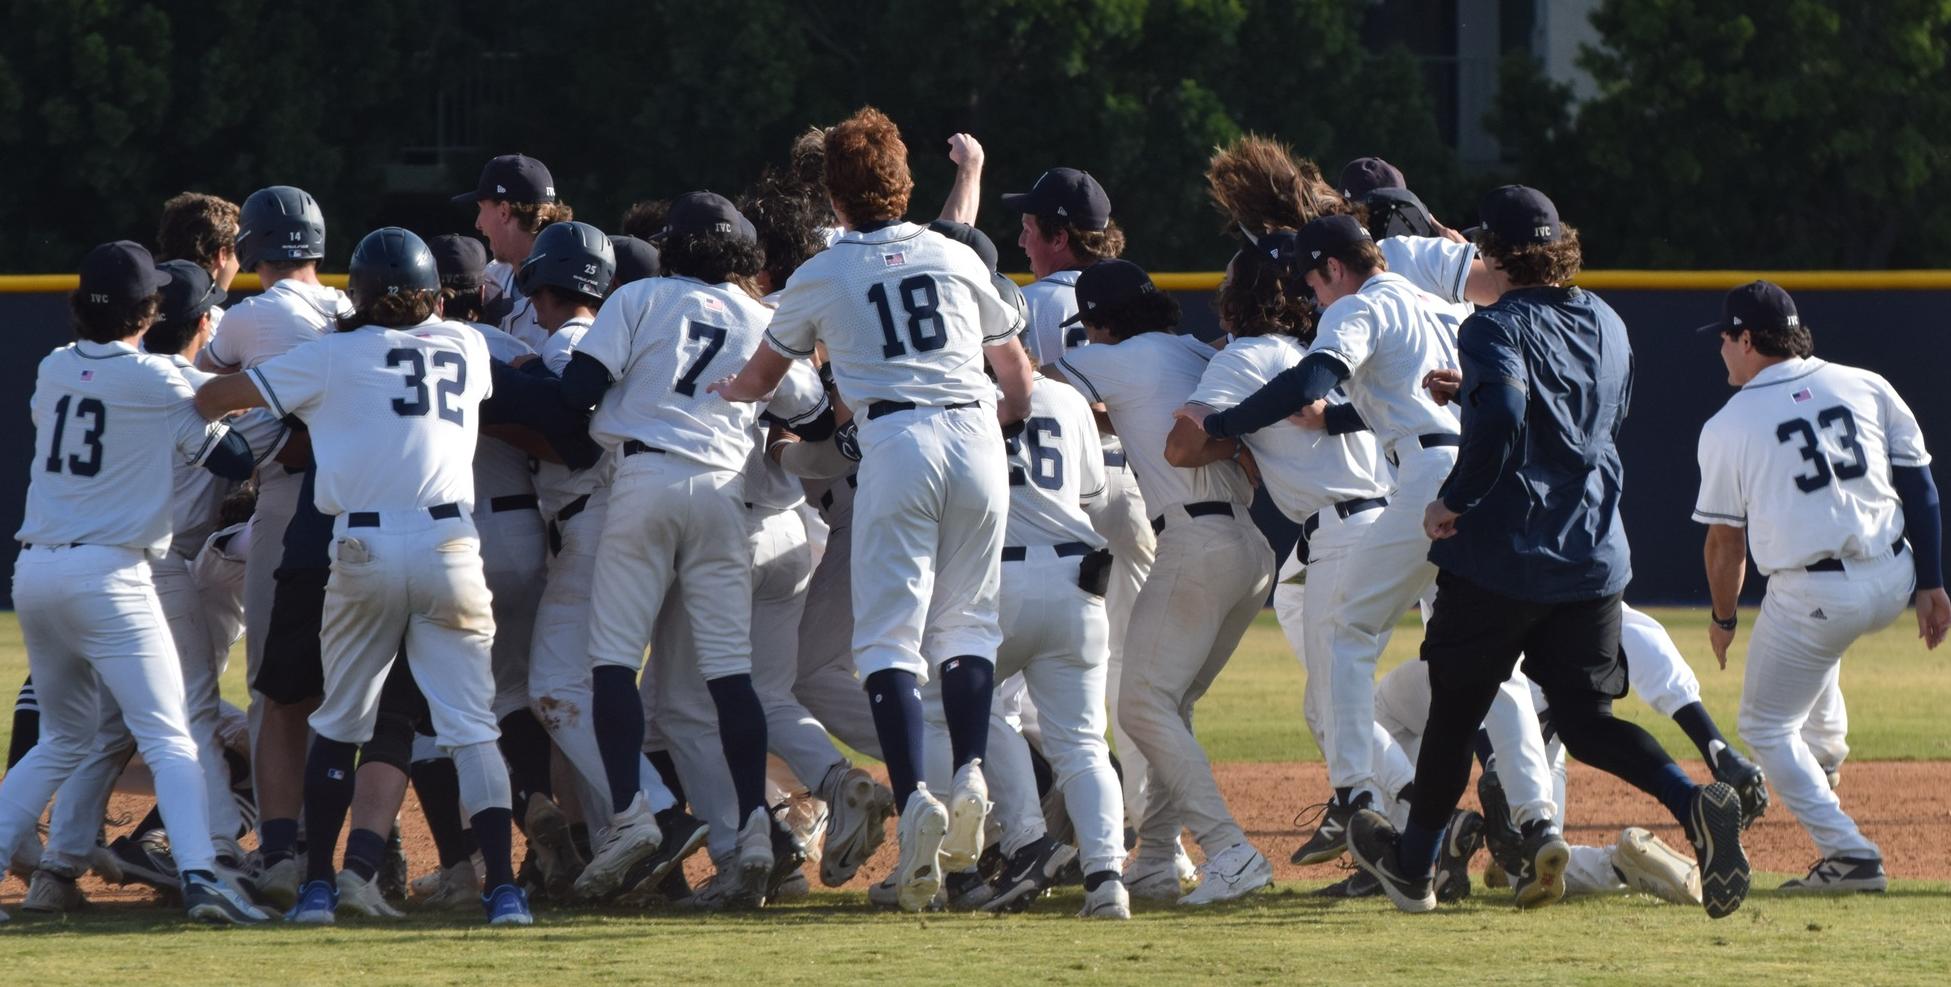 Baseball team is back at home and pulls off a dramatic win